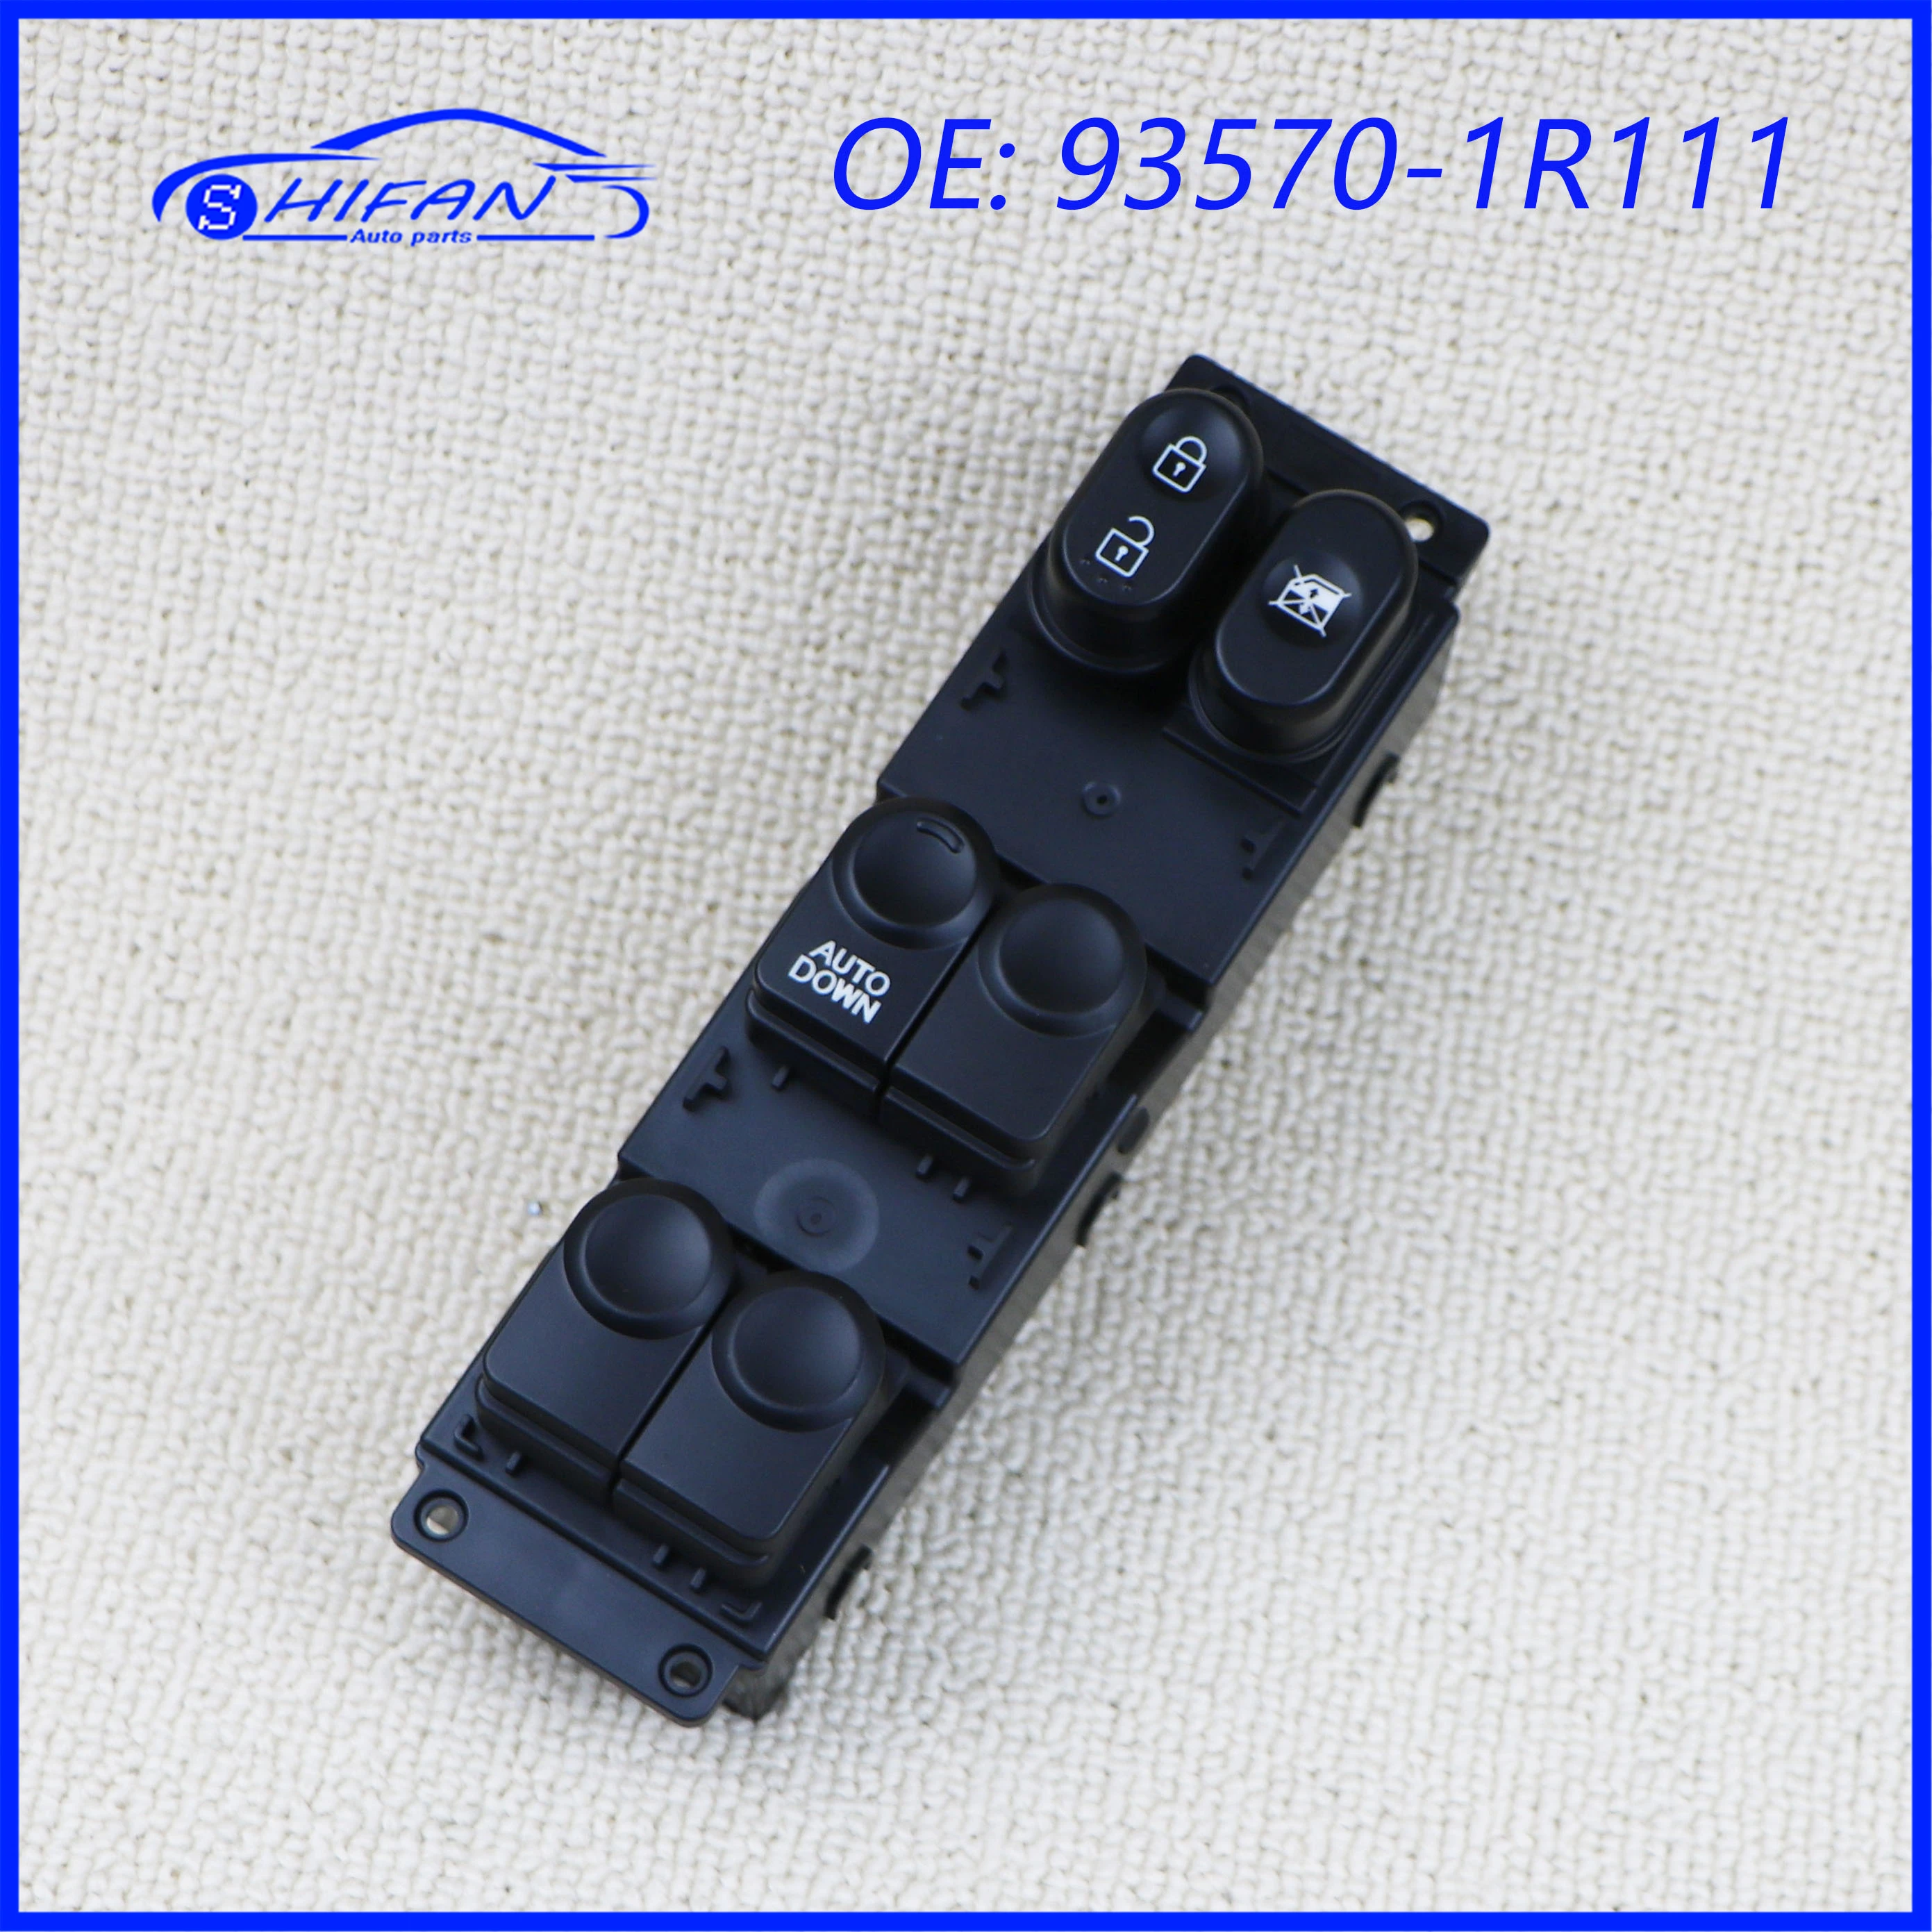 93570-1R111 Car Power Window Control Switch Electric Switch For Hyundai Accent 2010-2017 Car Accessories 935701R111 for hyundai ix25 2014 2018 power window master switch 93570 c9100 new